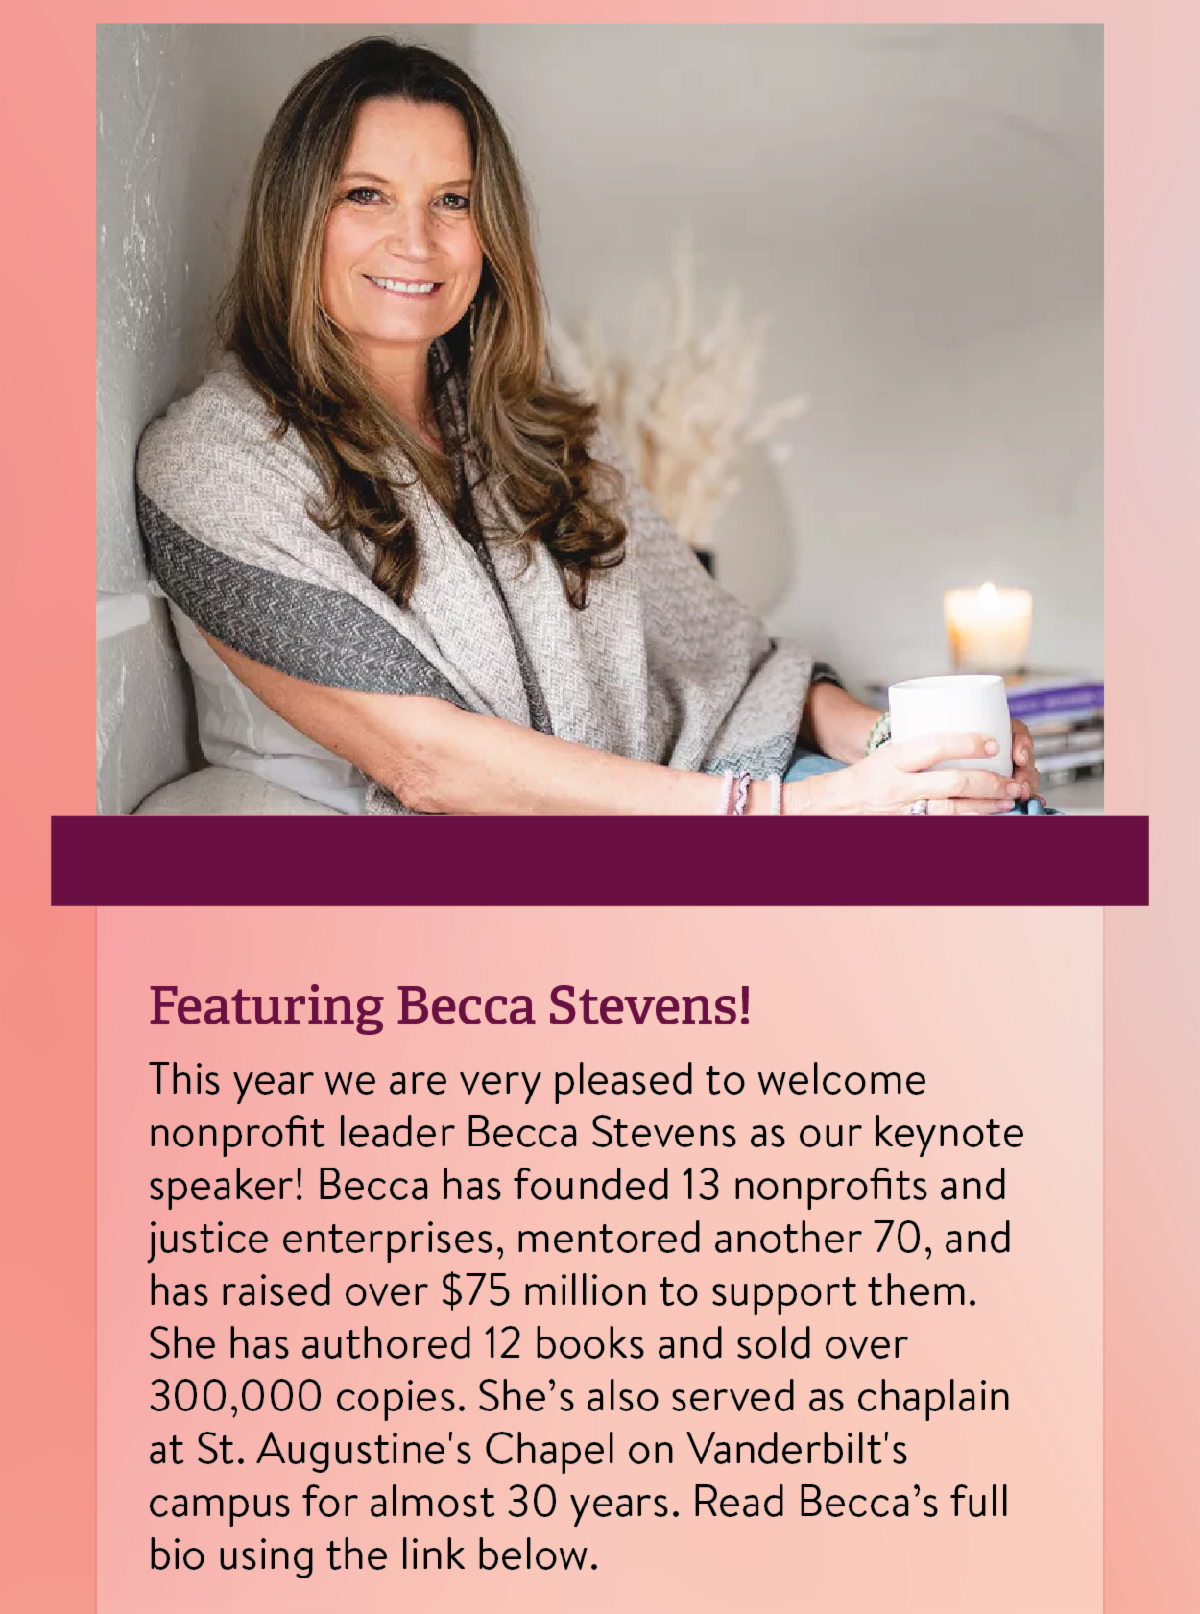 Featuring Becca Stevens! - This year we are very pleased to welcome nonprofit leader Becca Stevens as our keynote speaker! Becca has founded 13 nonprofits and justice enterprises, mentored another 70, and has raised over $75 million to support them. She has authored 12 books and sold over 300,000 copies. She’s also served as chaplain at St. Augustine's Chapel on Vanderbilt's campus for almost 30 years. Read Becca’s full bio using the link below.